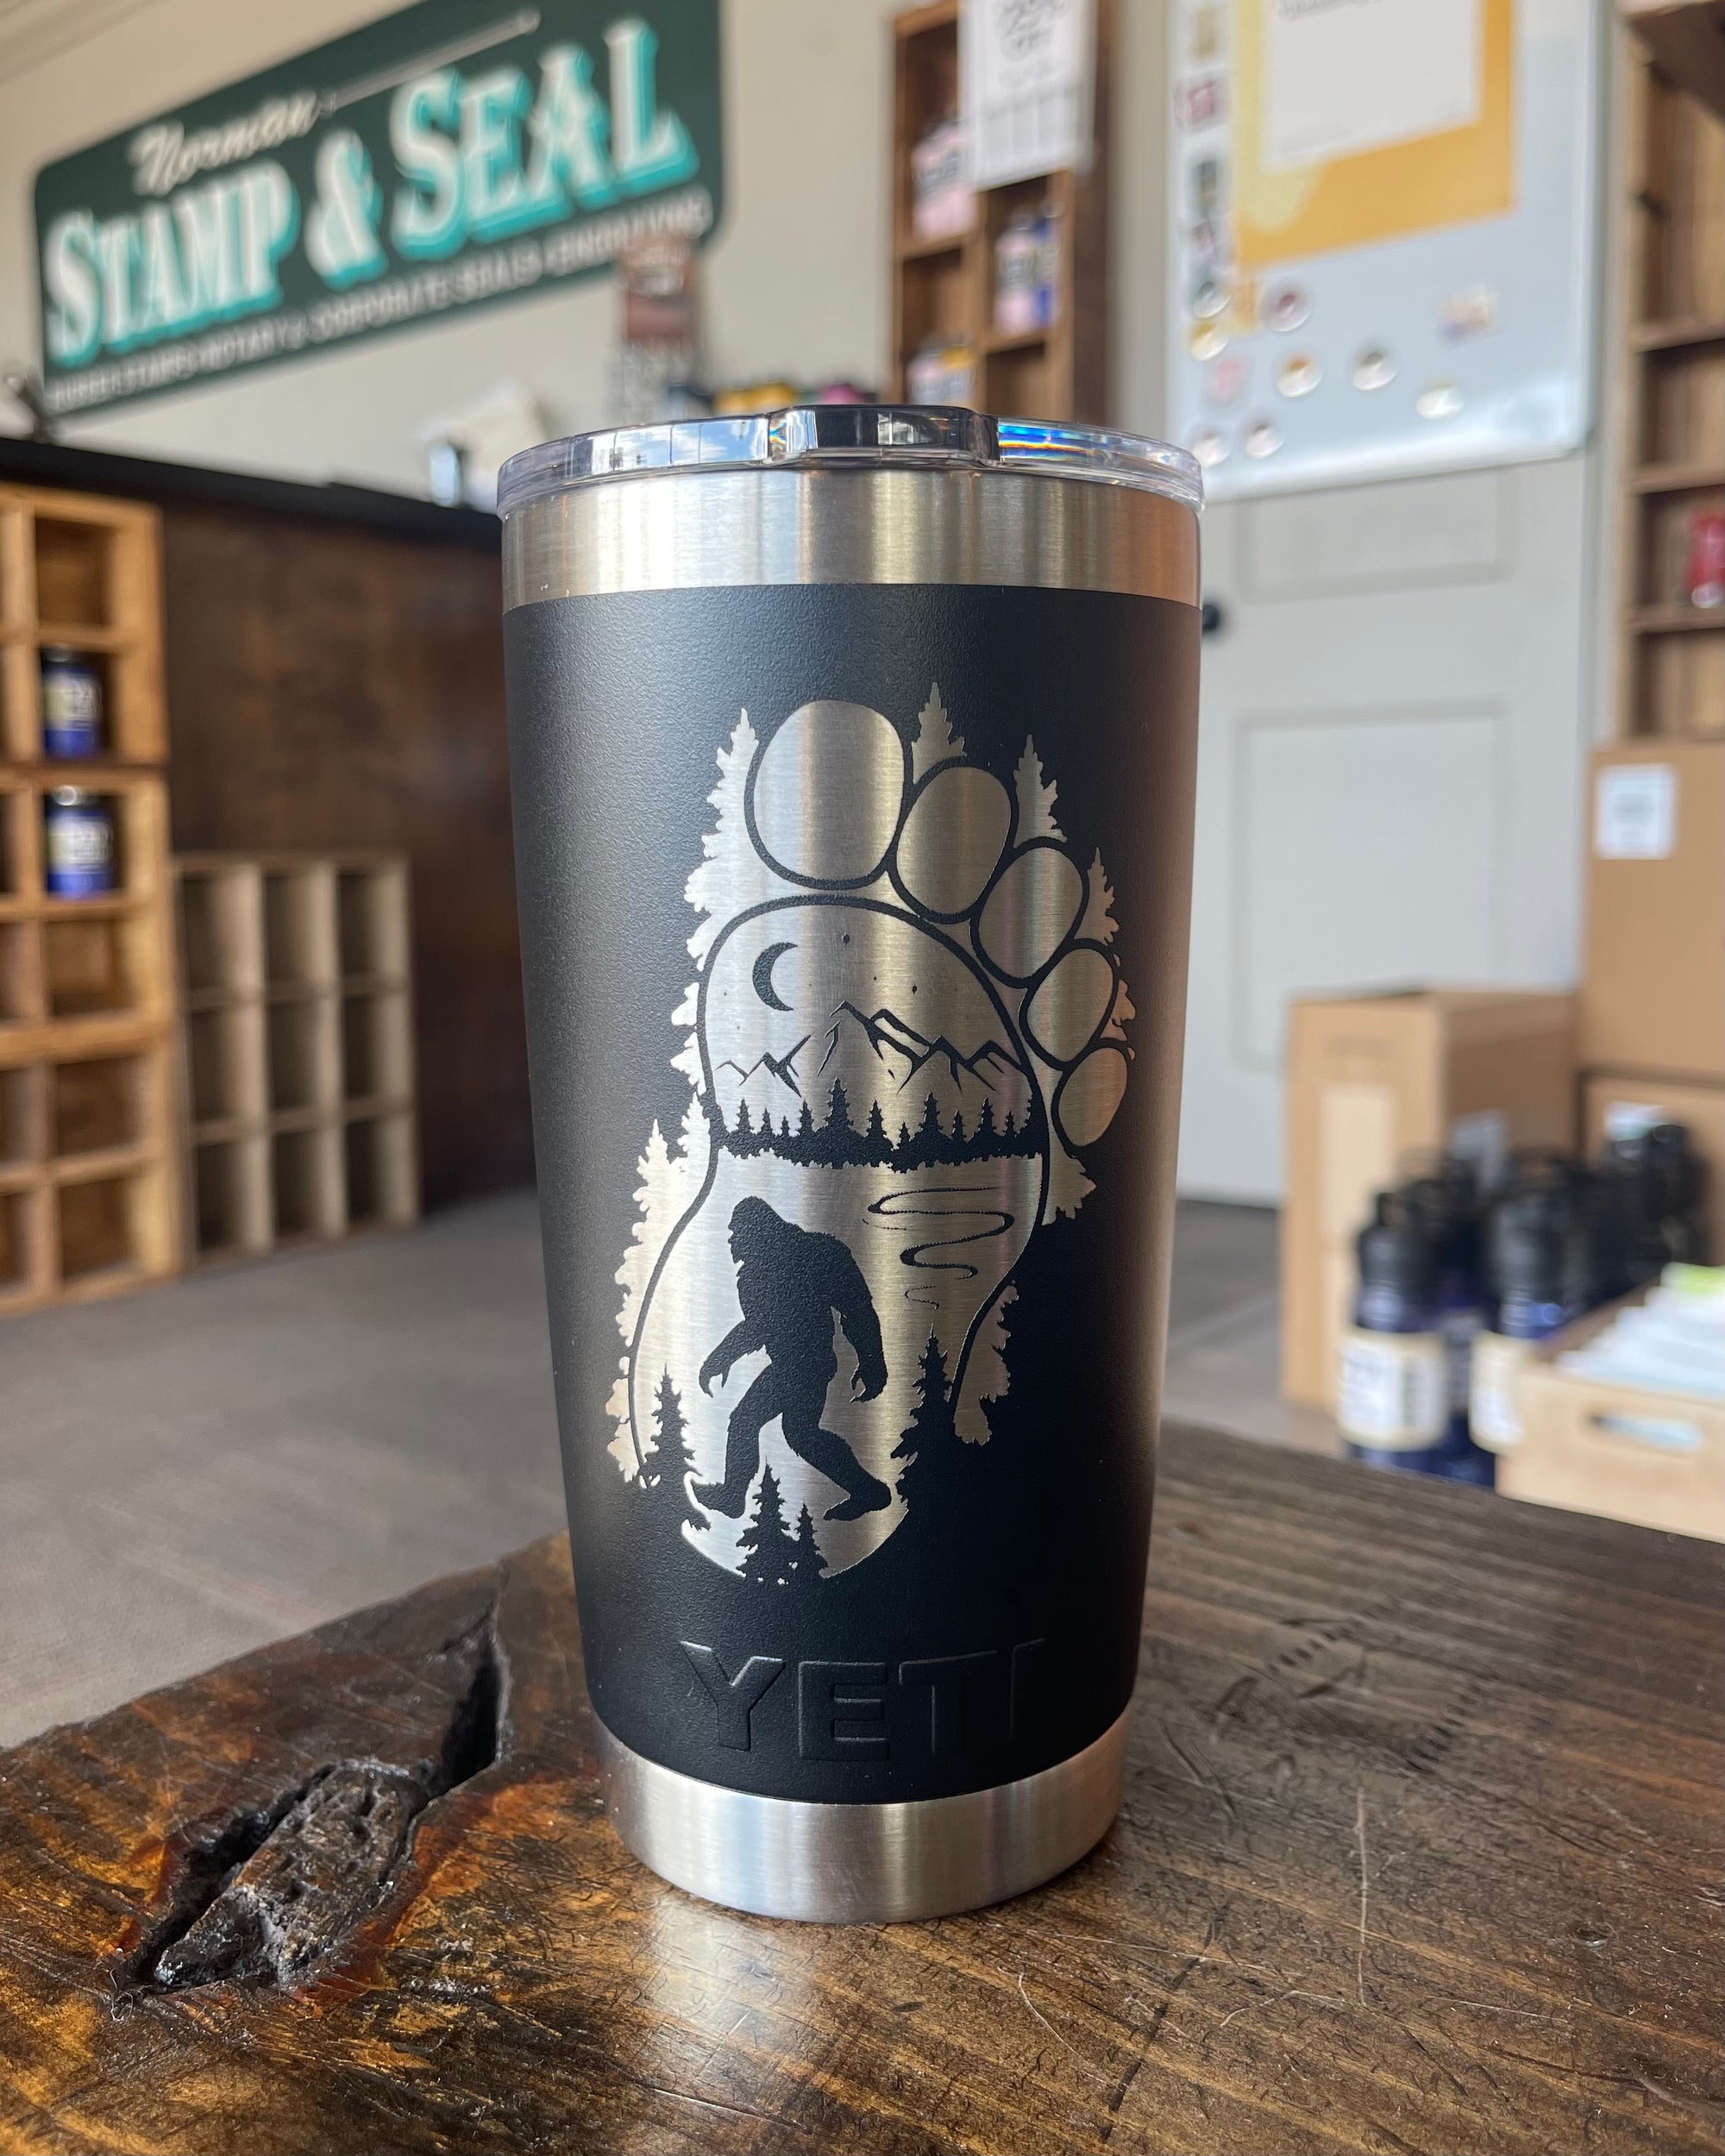 YETI Stainless Steel Tumbler Laser Engraved 20 or 30 Oz, Can